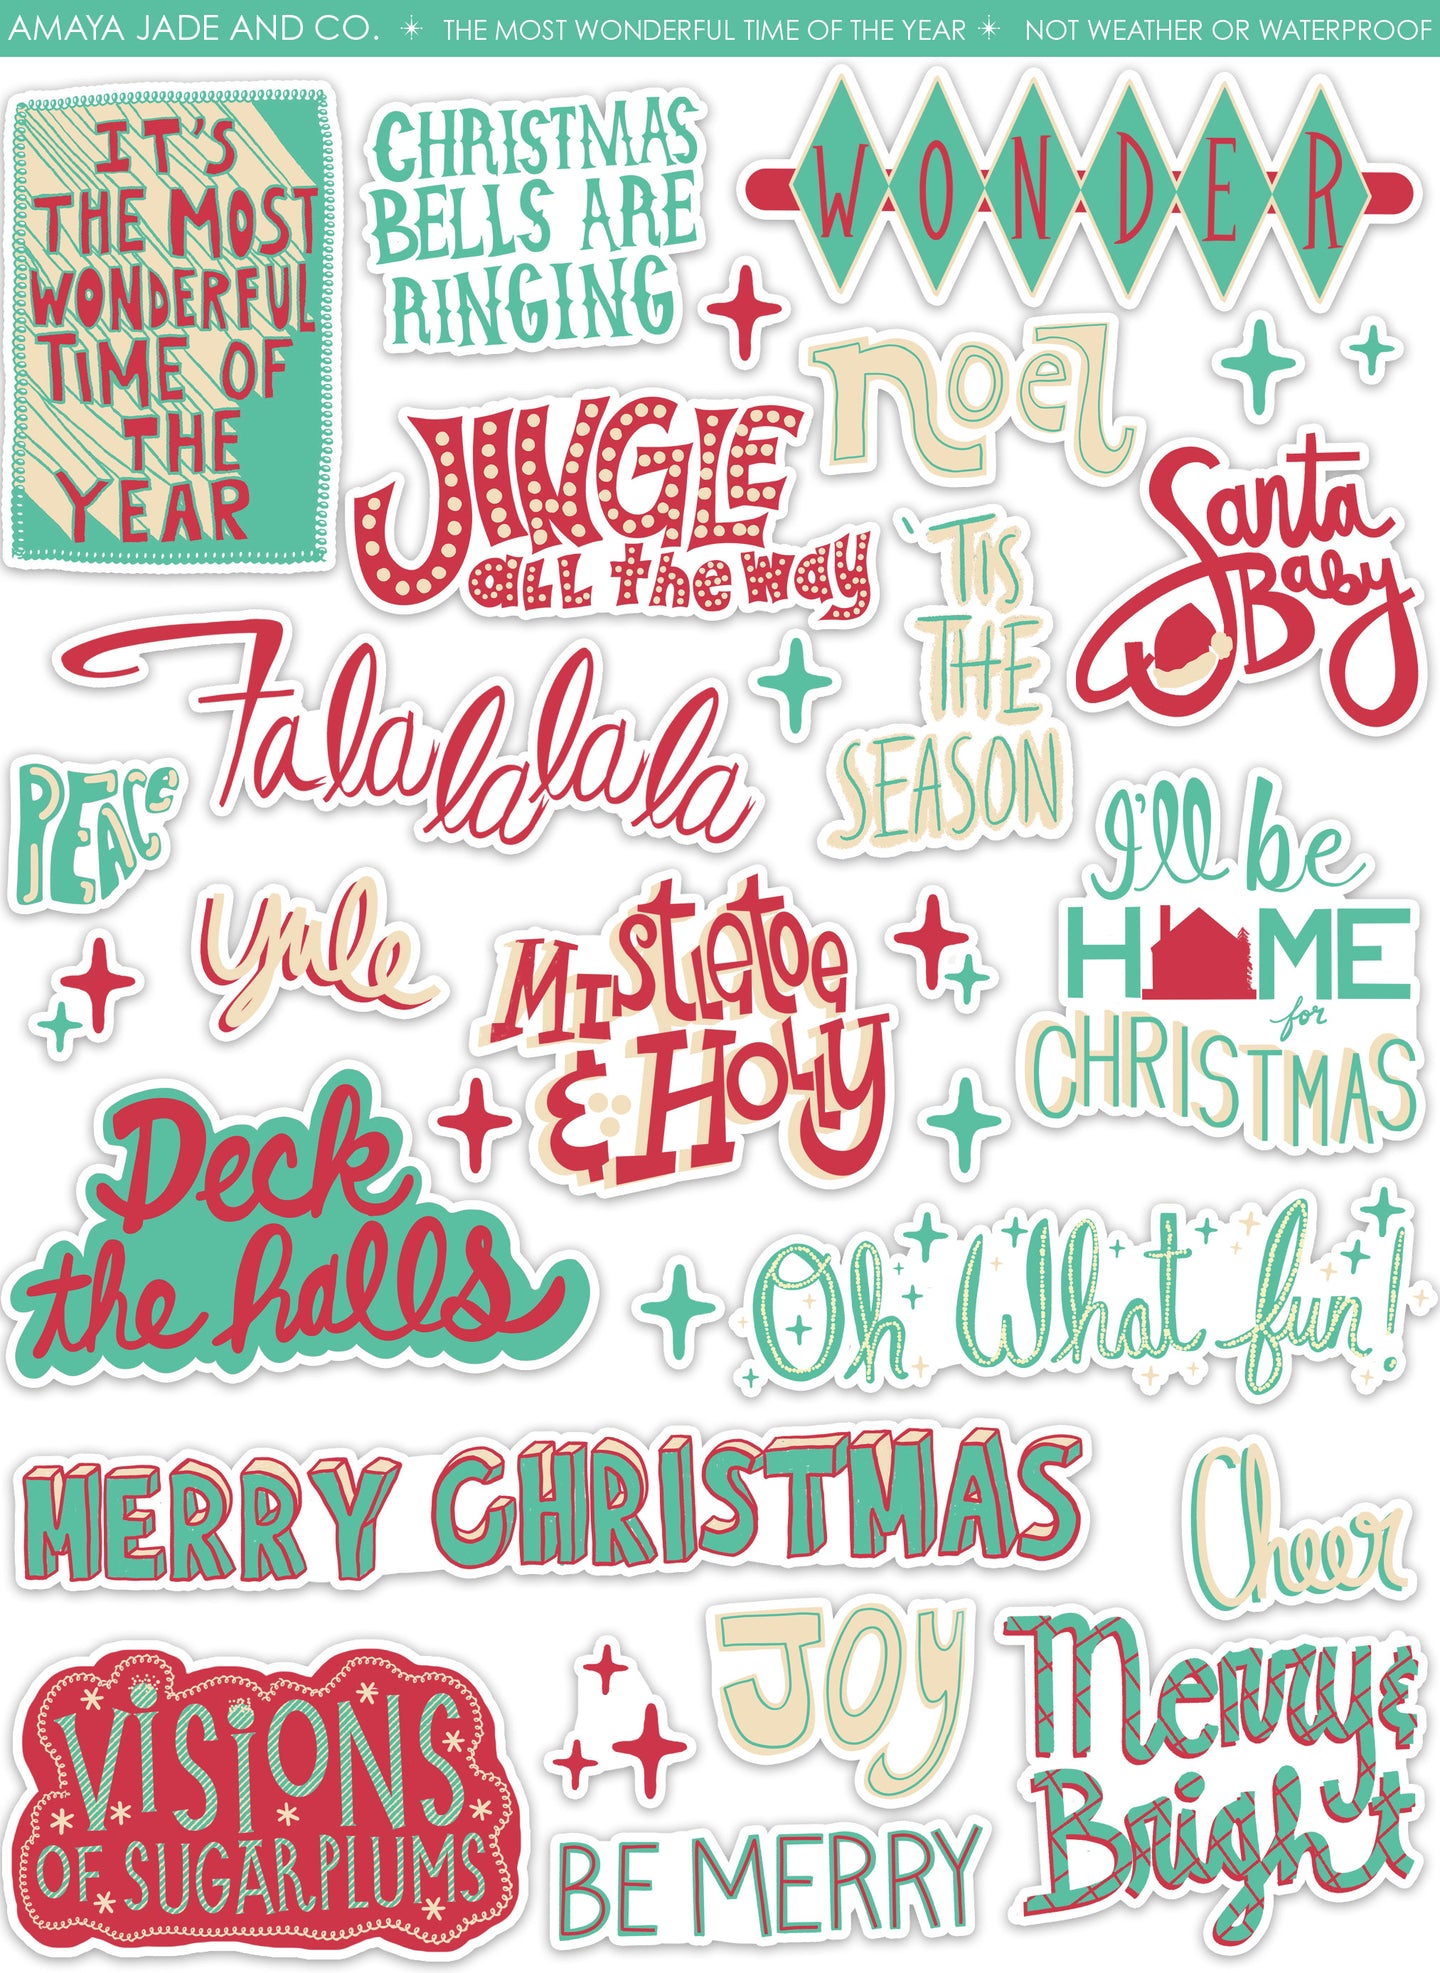 The Most Wonderful Time of the Year Christmas Art Sticker Set